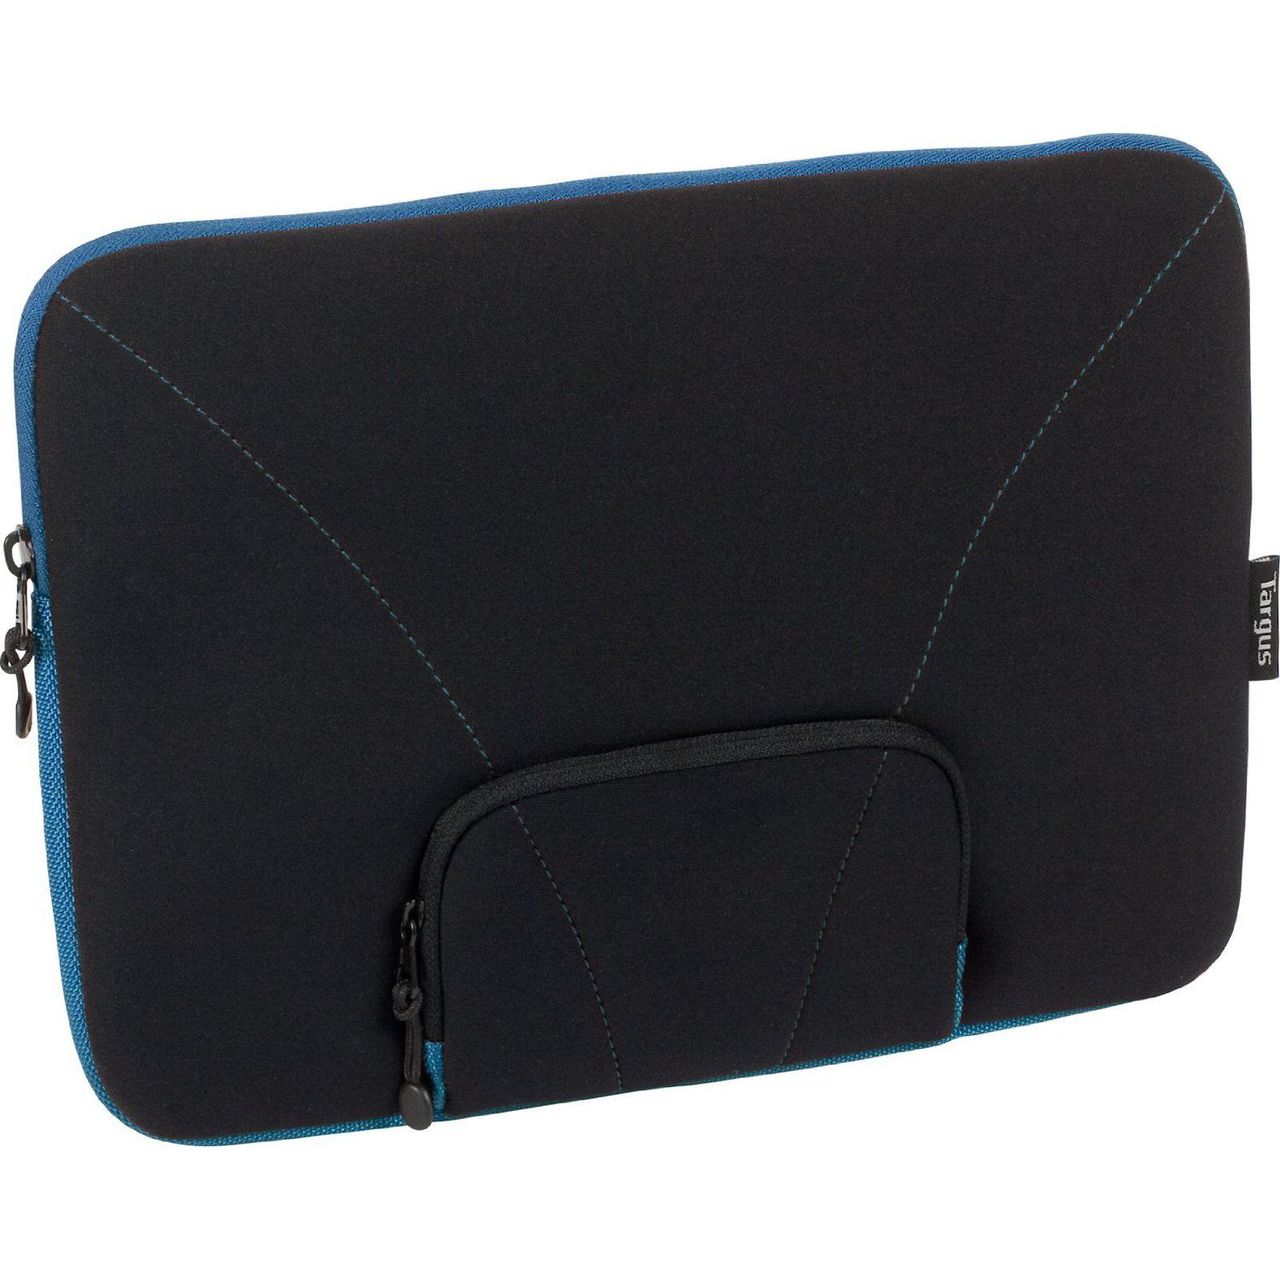 Targus Slipcase with Mini Pocket Designed for 12" Netbooks TSS121US (Black with Blue Accents)